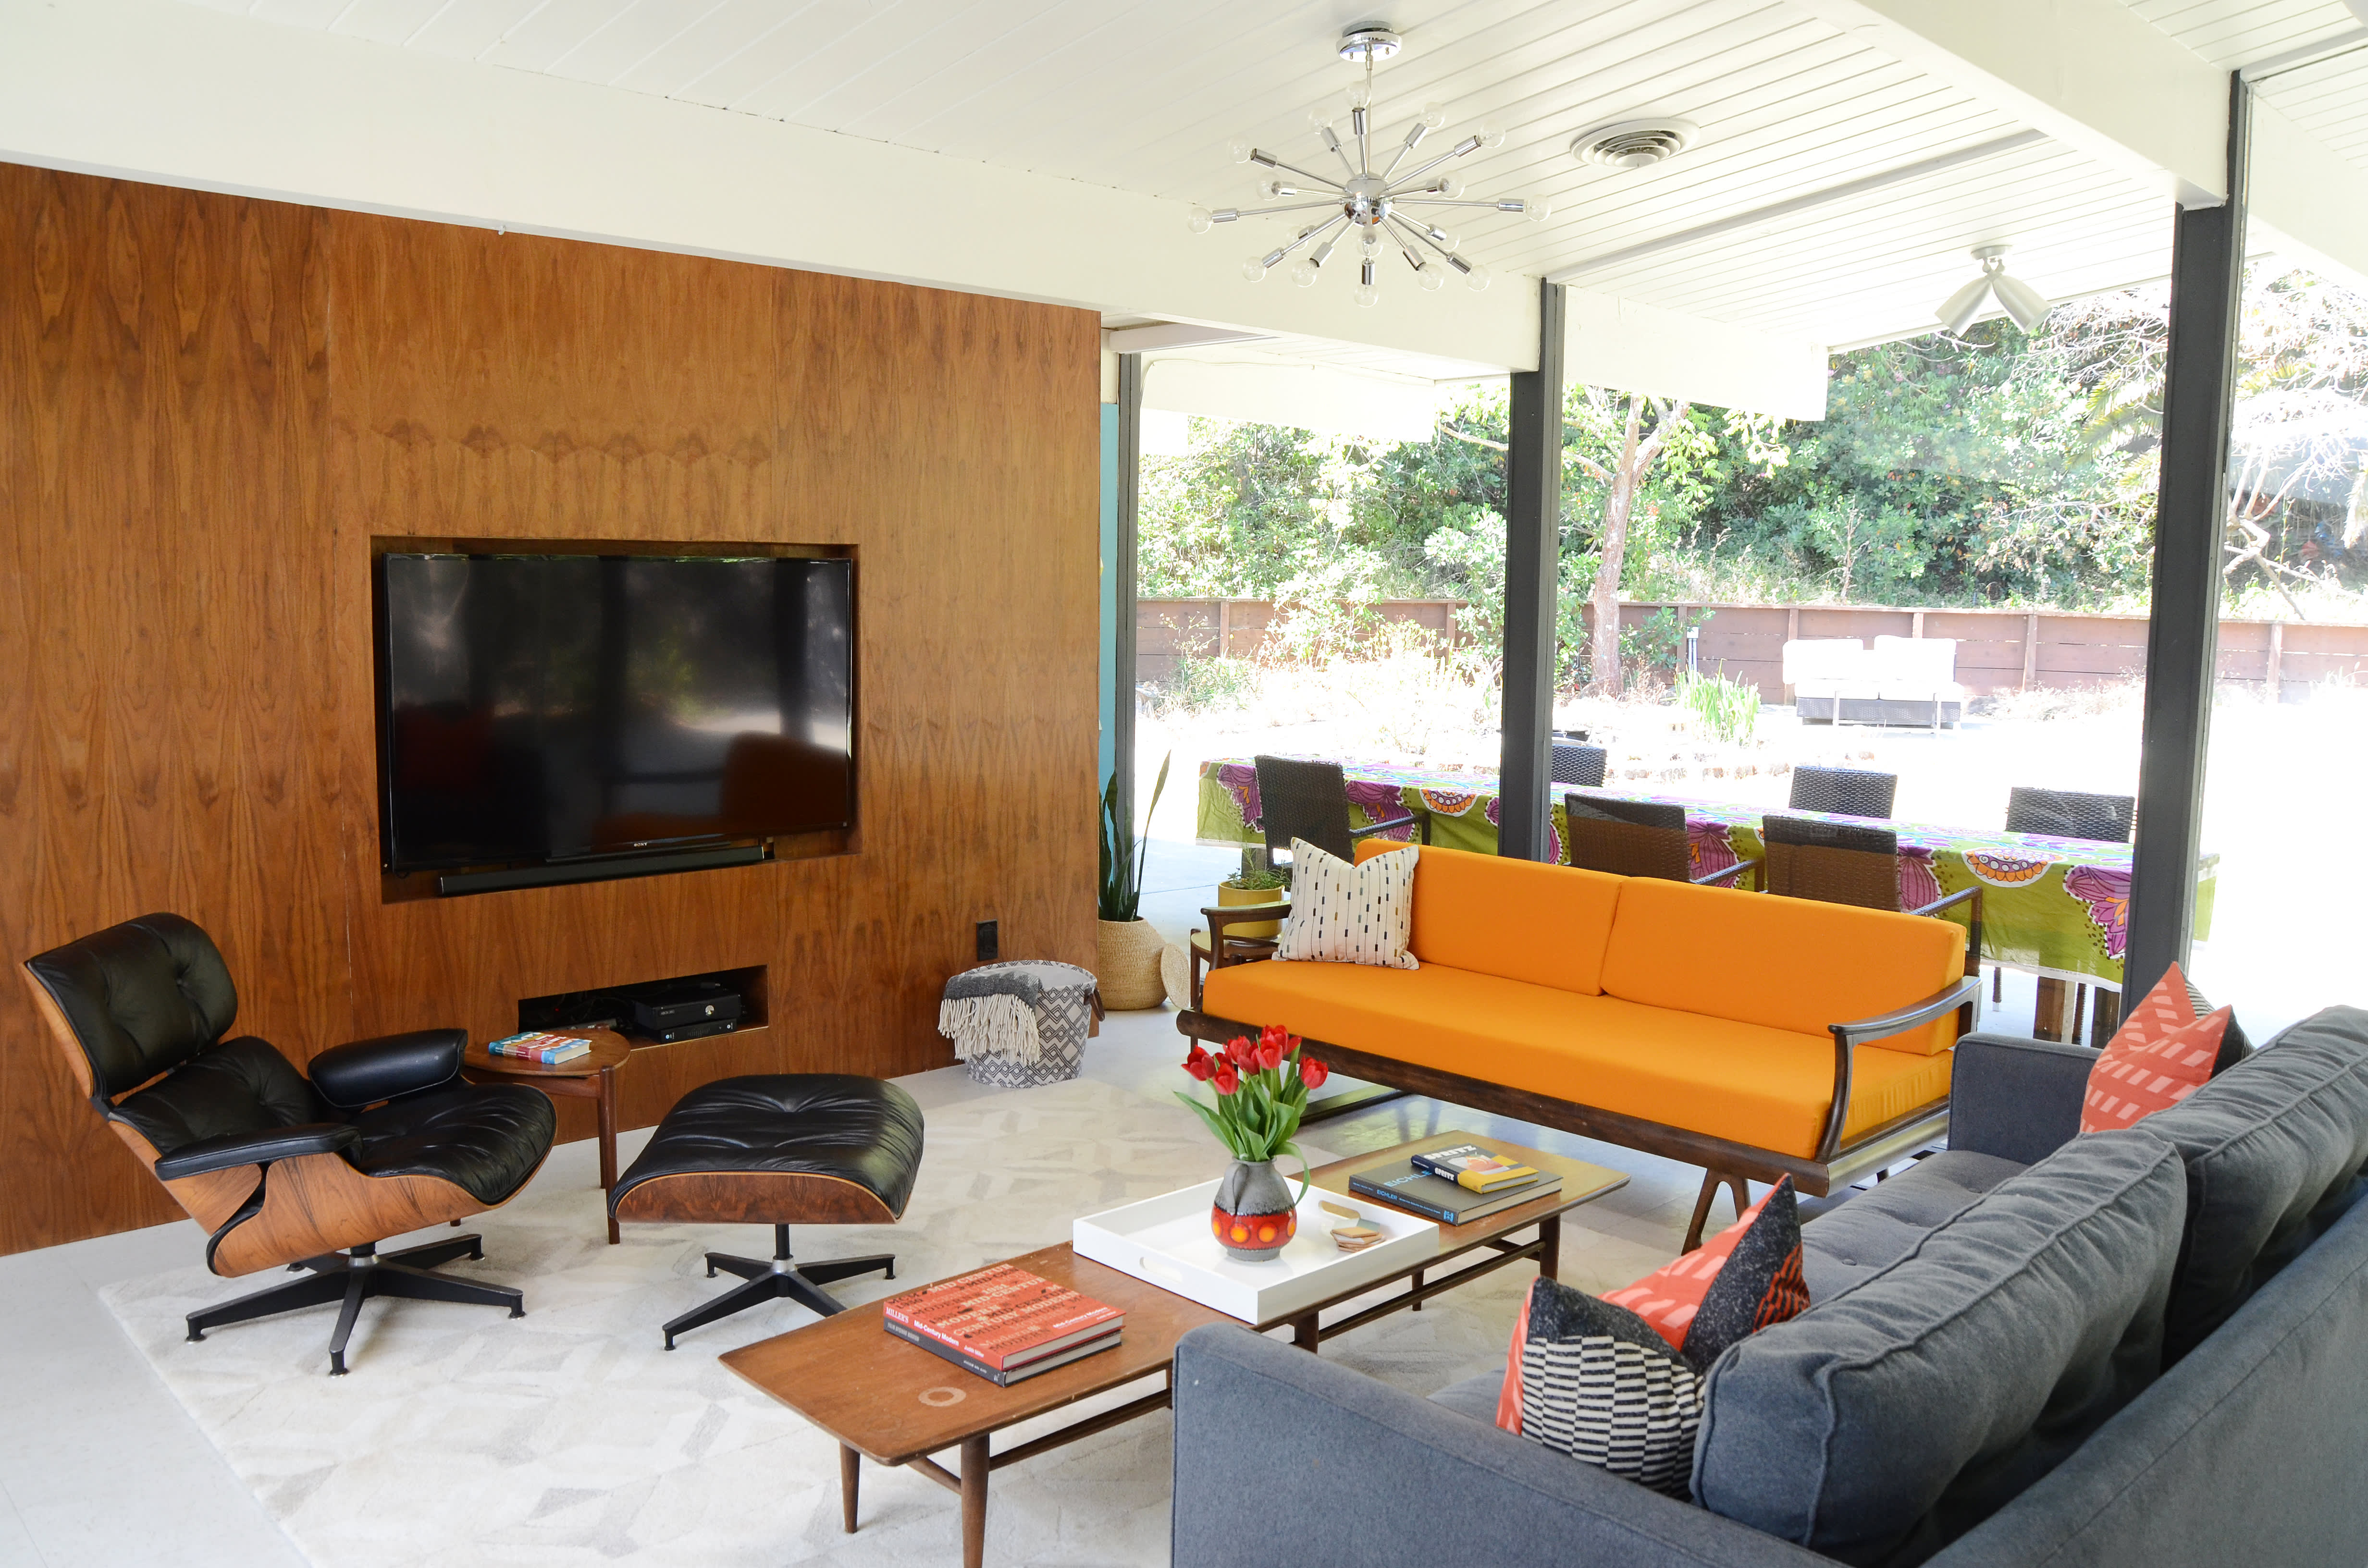 The Basics Of Mid Century Modern Design | Apartment Therapy